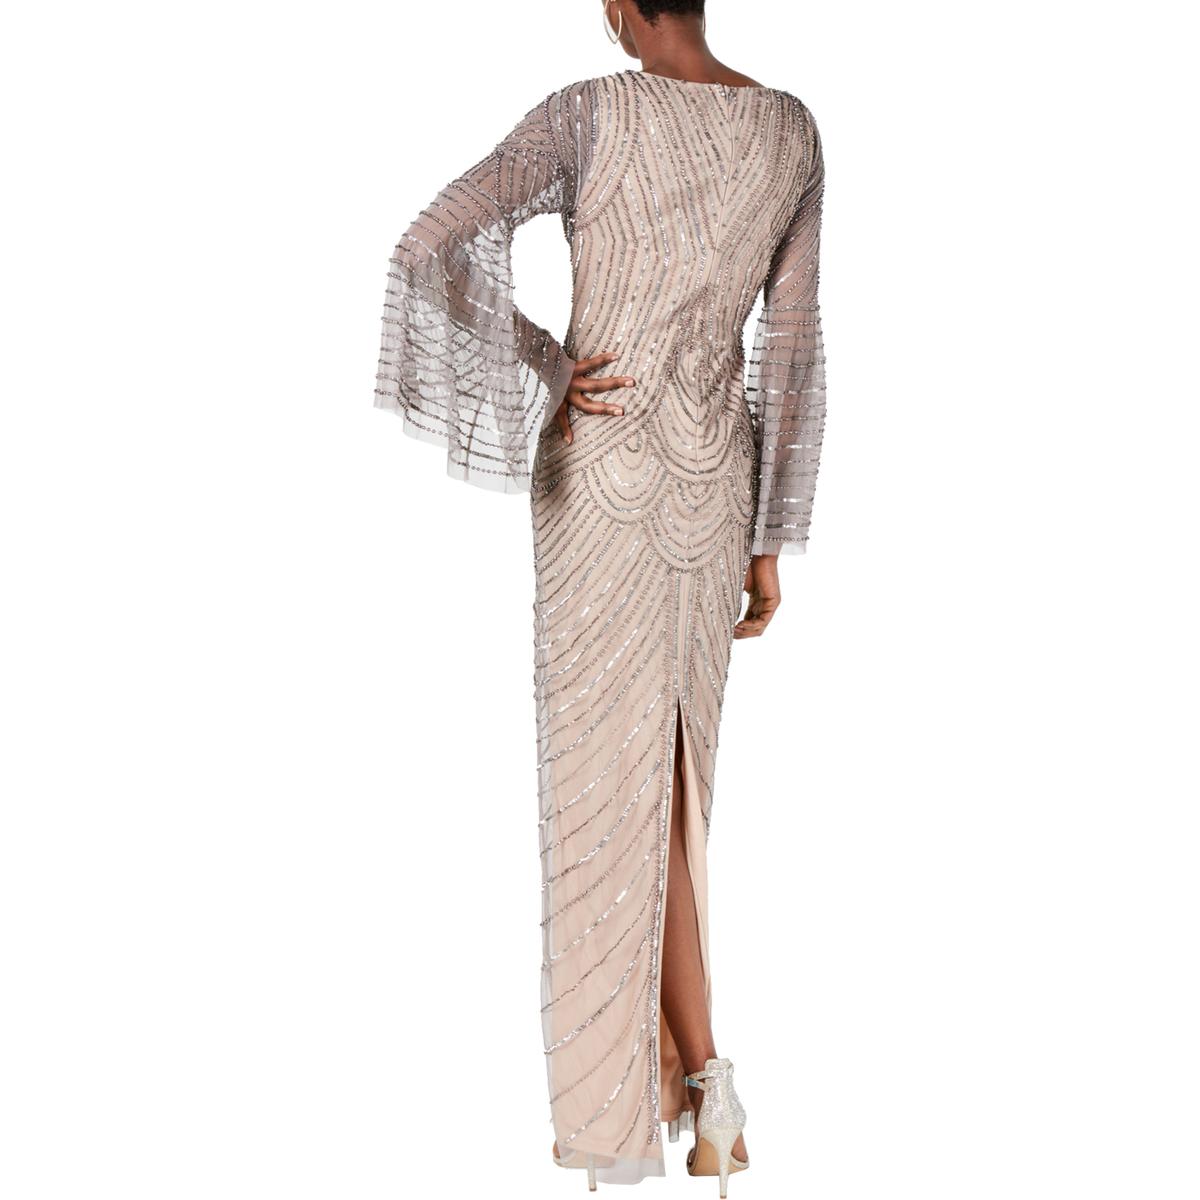 Adrianna Papell Womens Gray Mesh Embellished Evening Dress Gown 2 BHFO ...